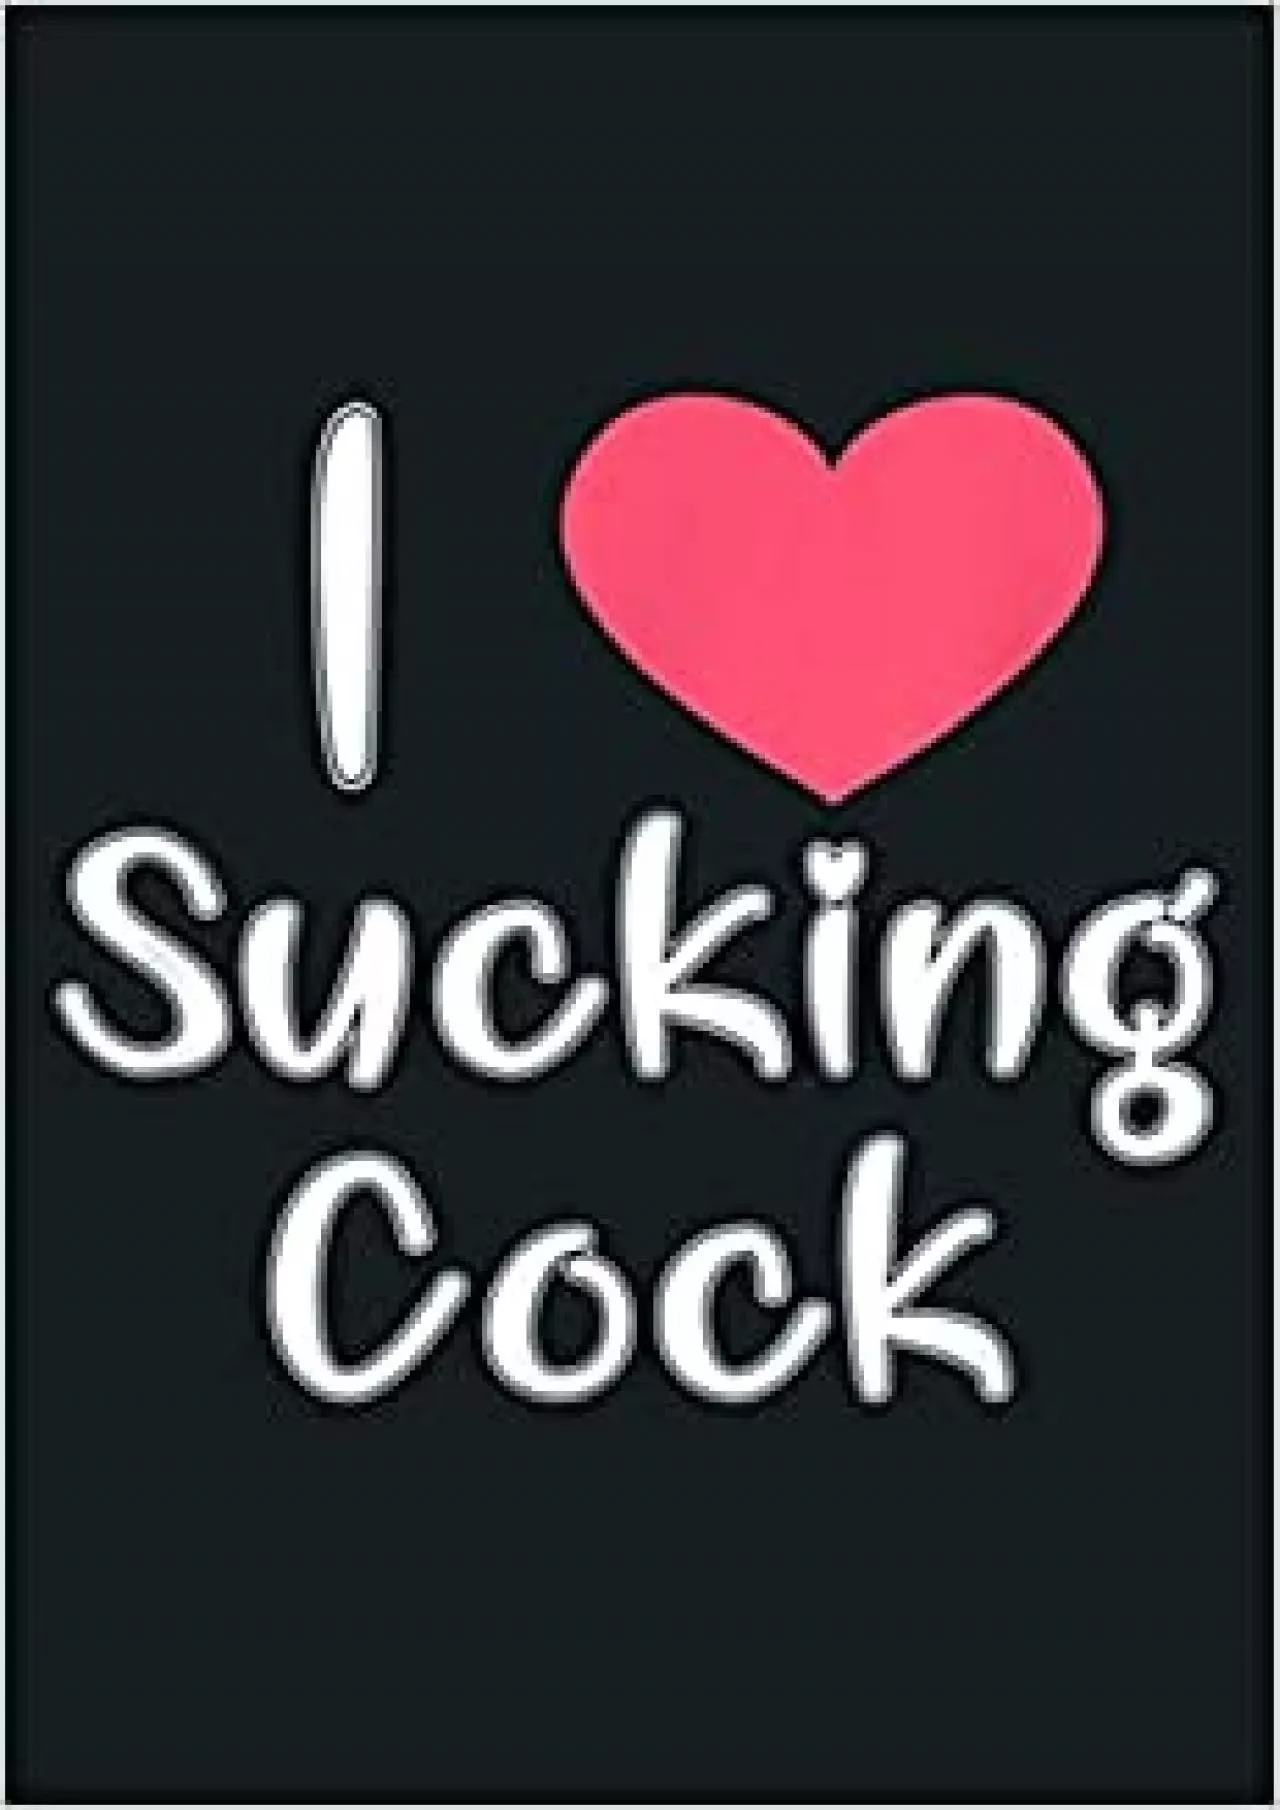 I Love Sucking Cock Naughty Kinky Sex BDSM Sub Dom: Notebook Planner -6x9 inch Daily Planner